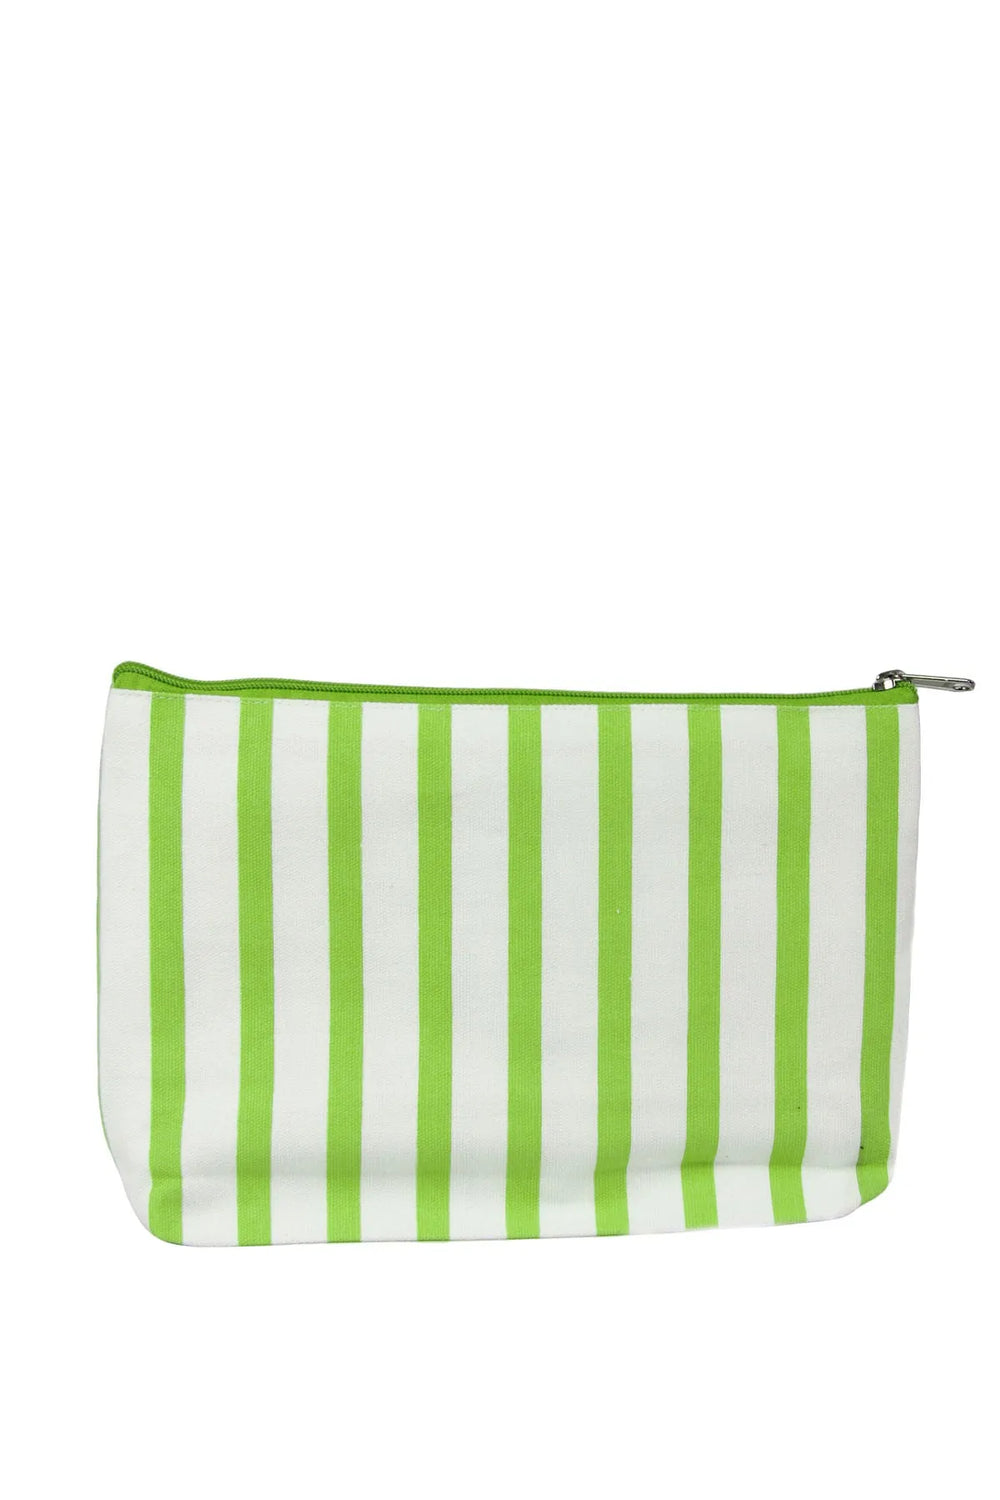 White and Green Striped Cosmetic Bag Lime